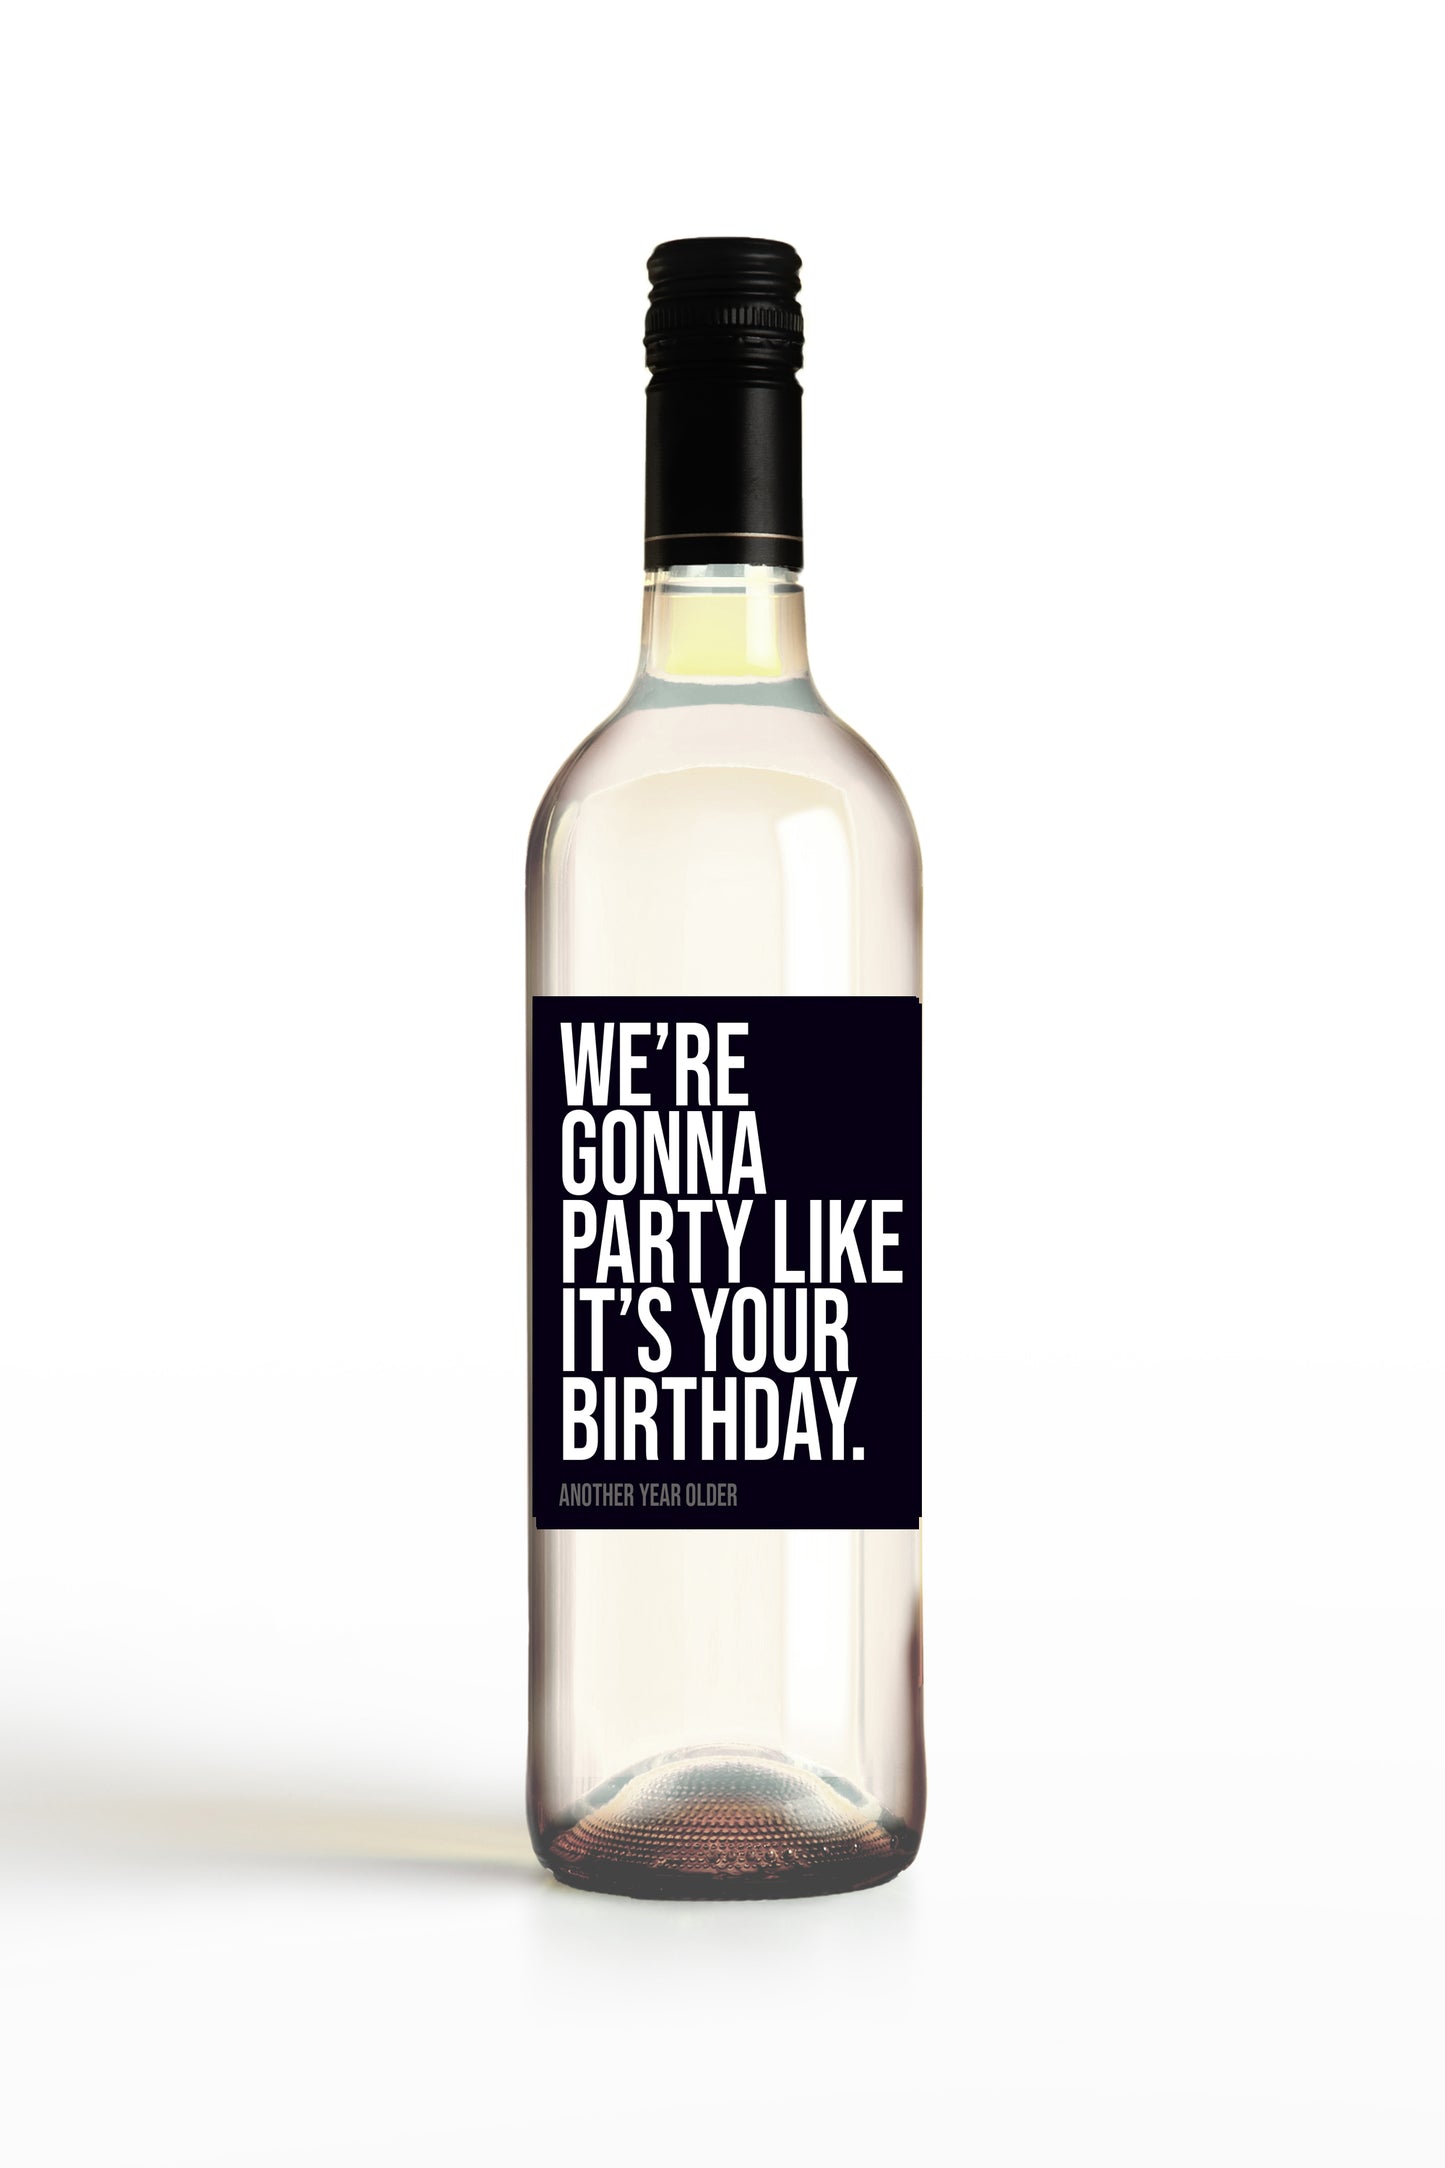 We're Gonna Party Like It's Your Birthday.